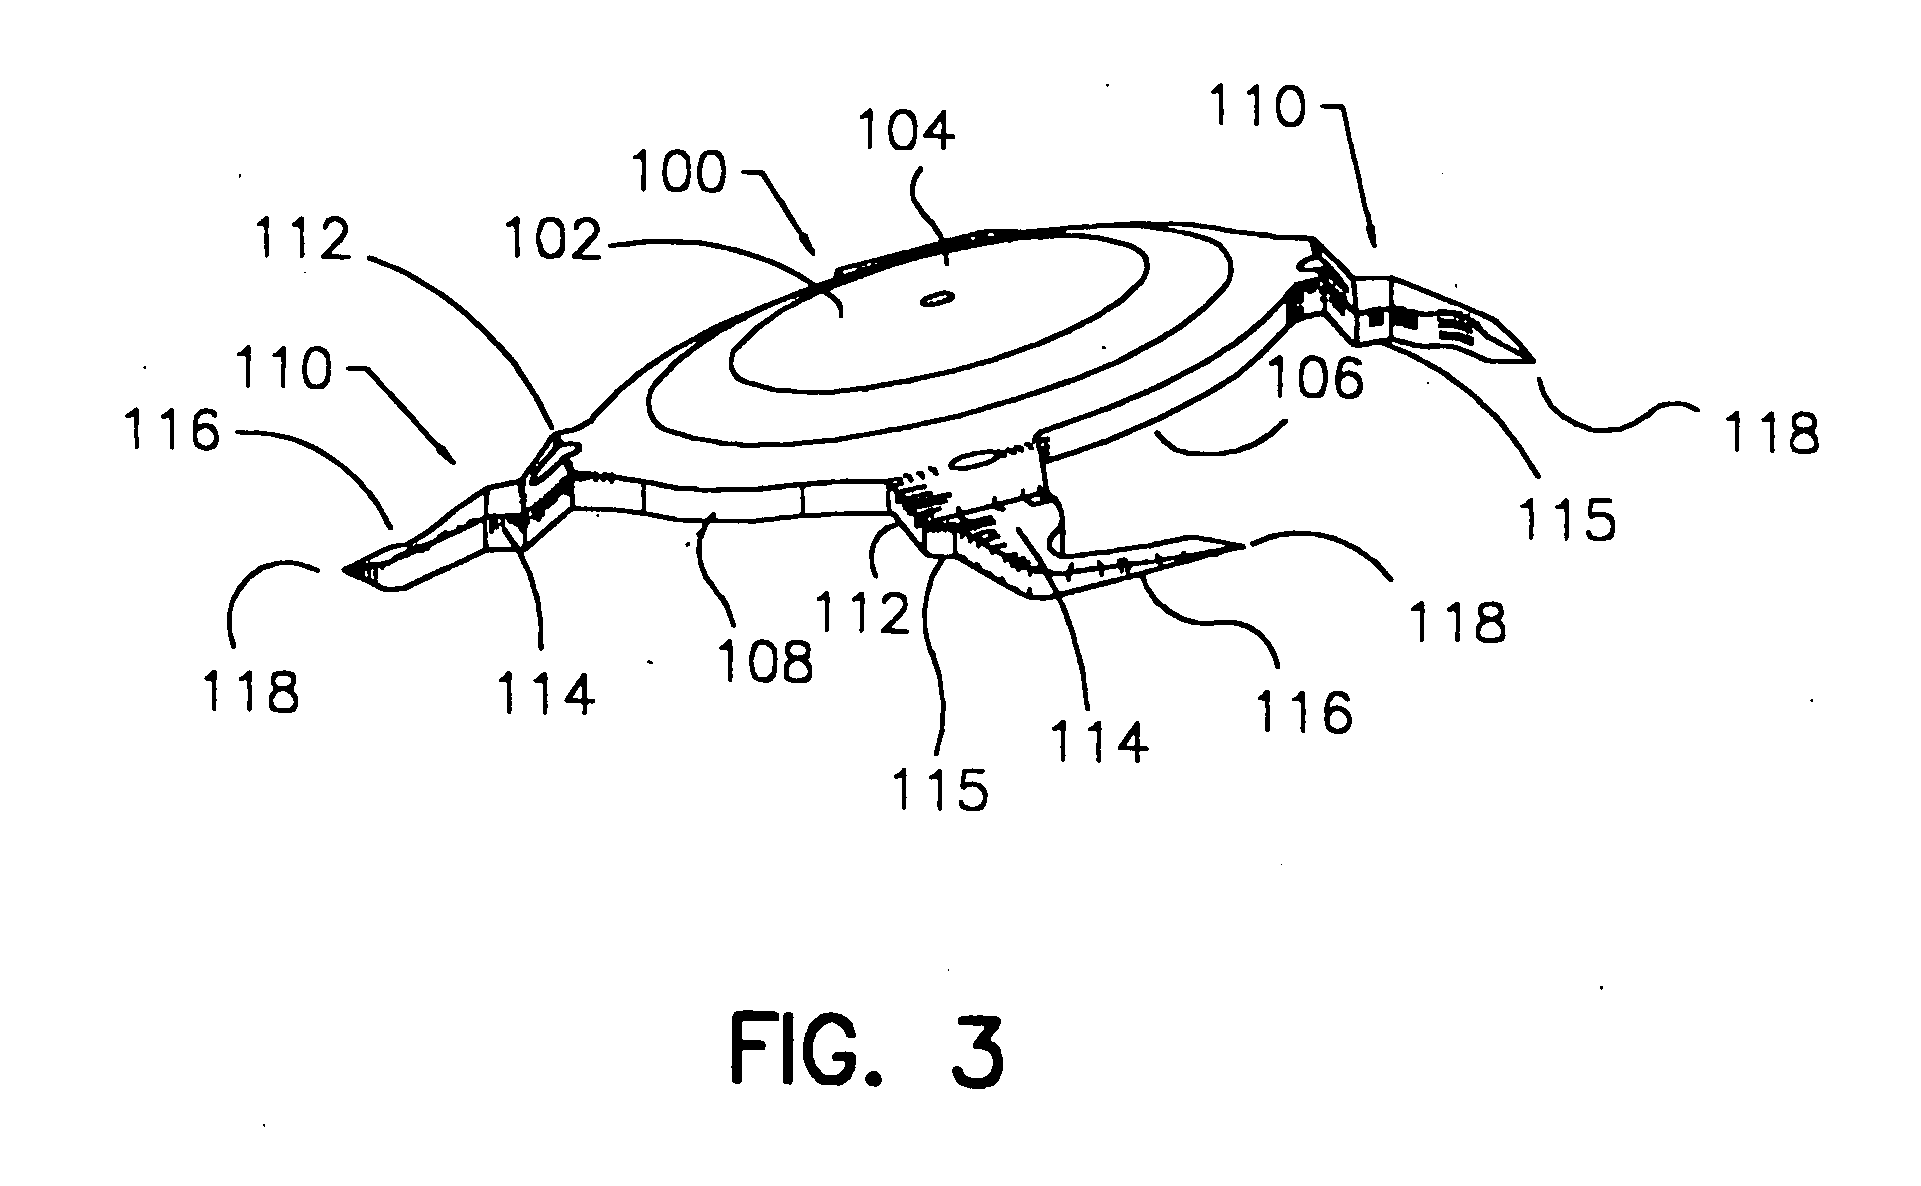 Refractive intraocular implant lens and method